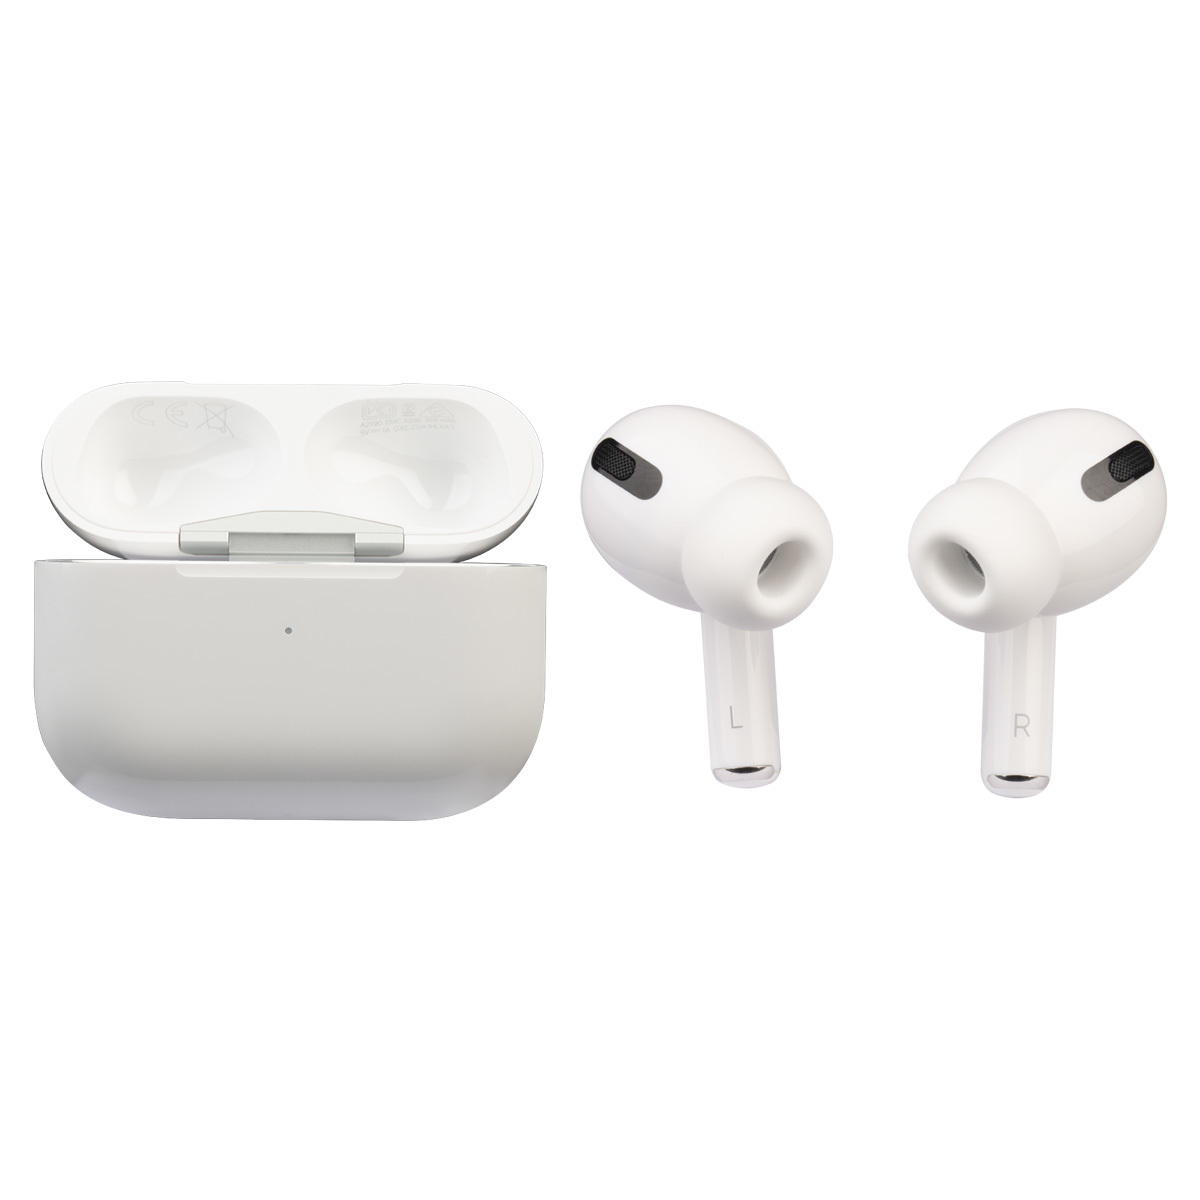 For iPhone AirPods Pro with Wireless AirPod Charging Case (MWP22ZM